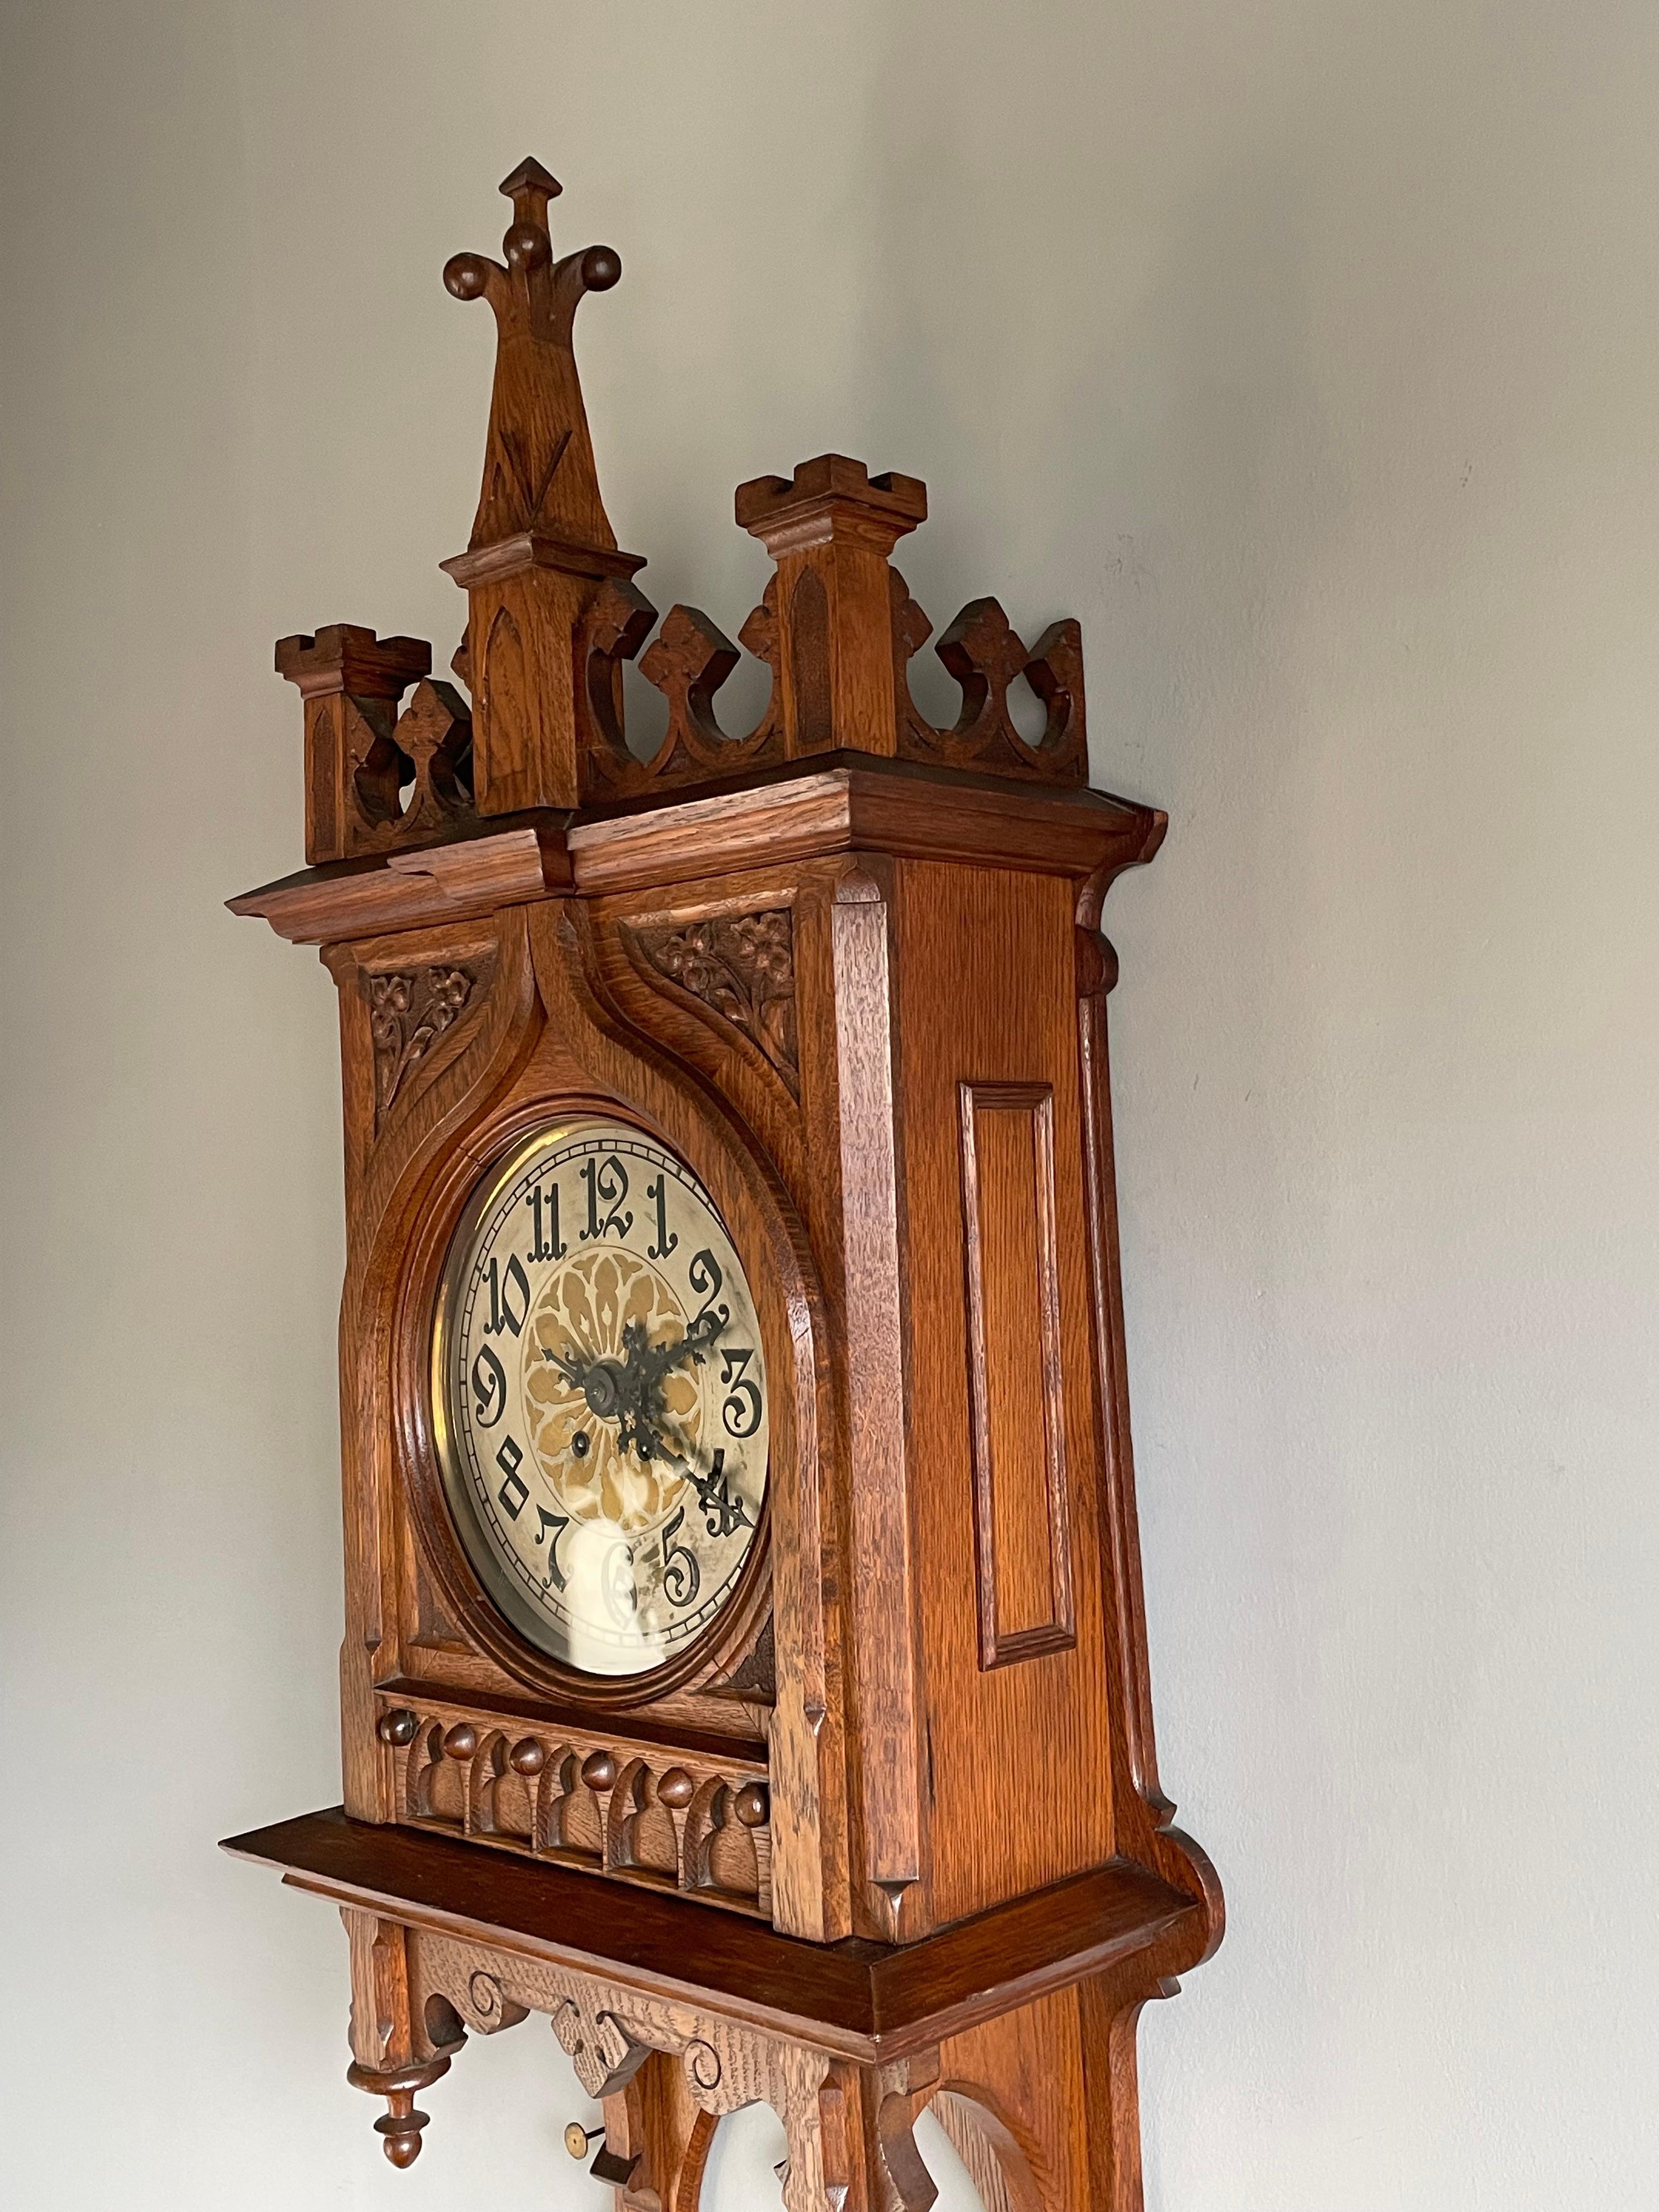 Rare & Large Antique Hand Carved Gothic Revival Wall Clock w. Lenzkirch Movement 1